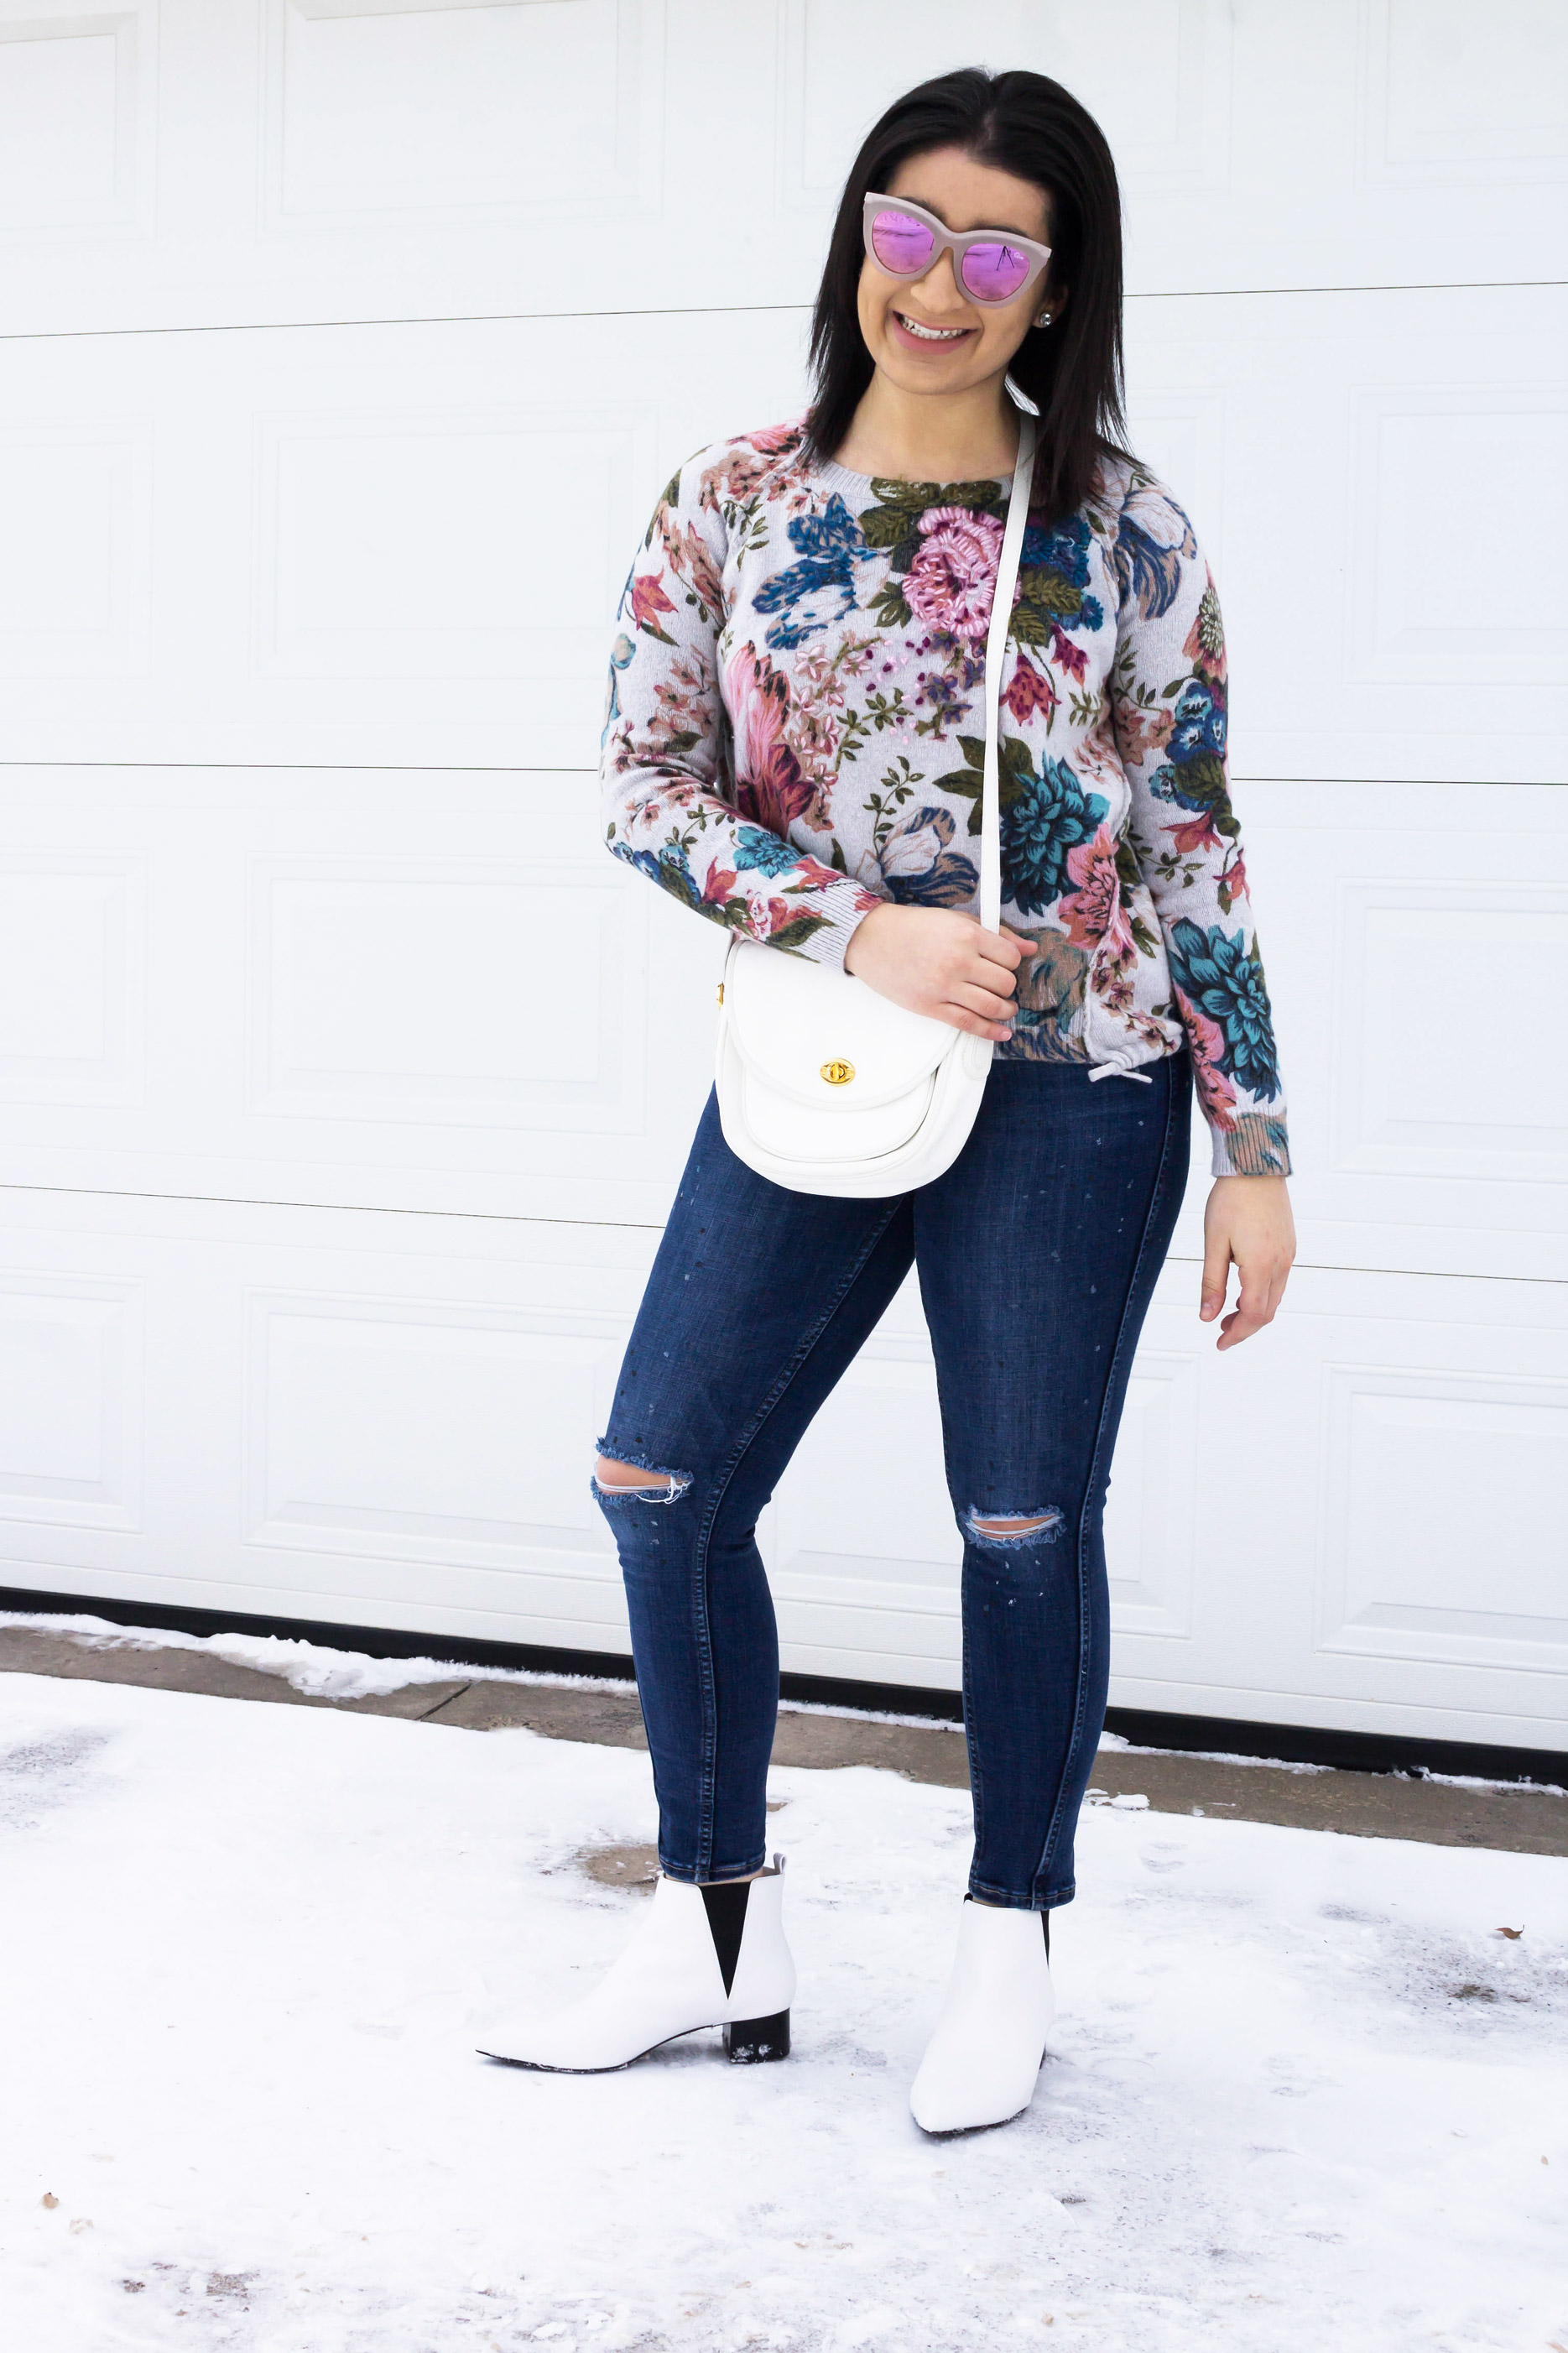 Thrifted: Anthropologie Angel of the North Floral Sweater